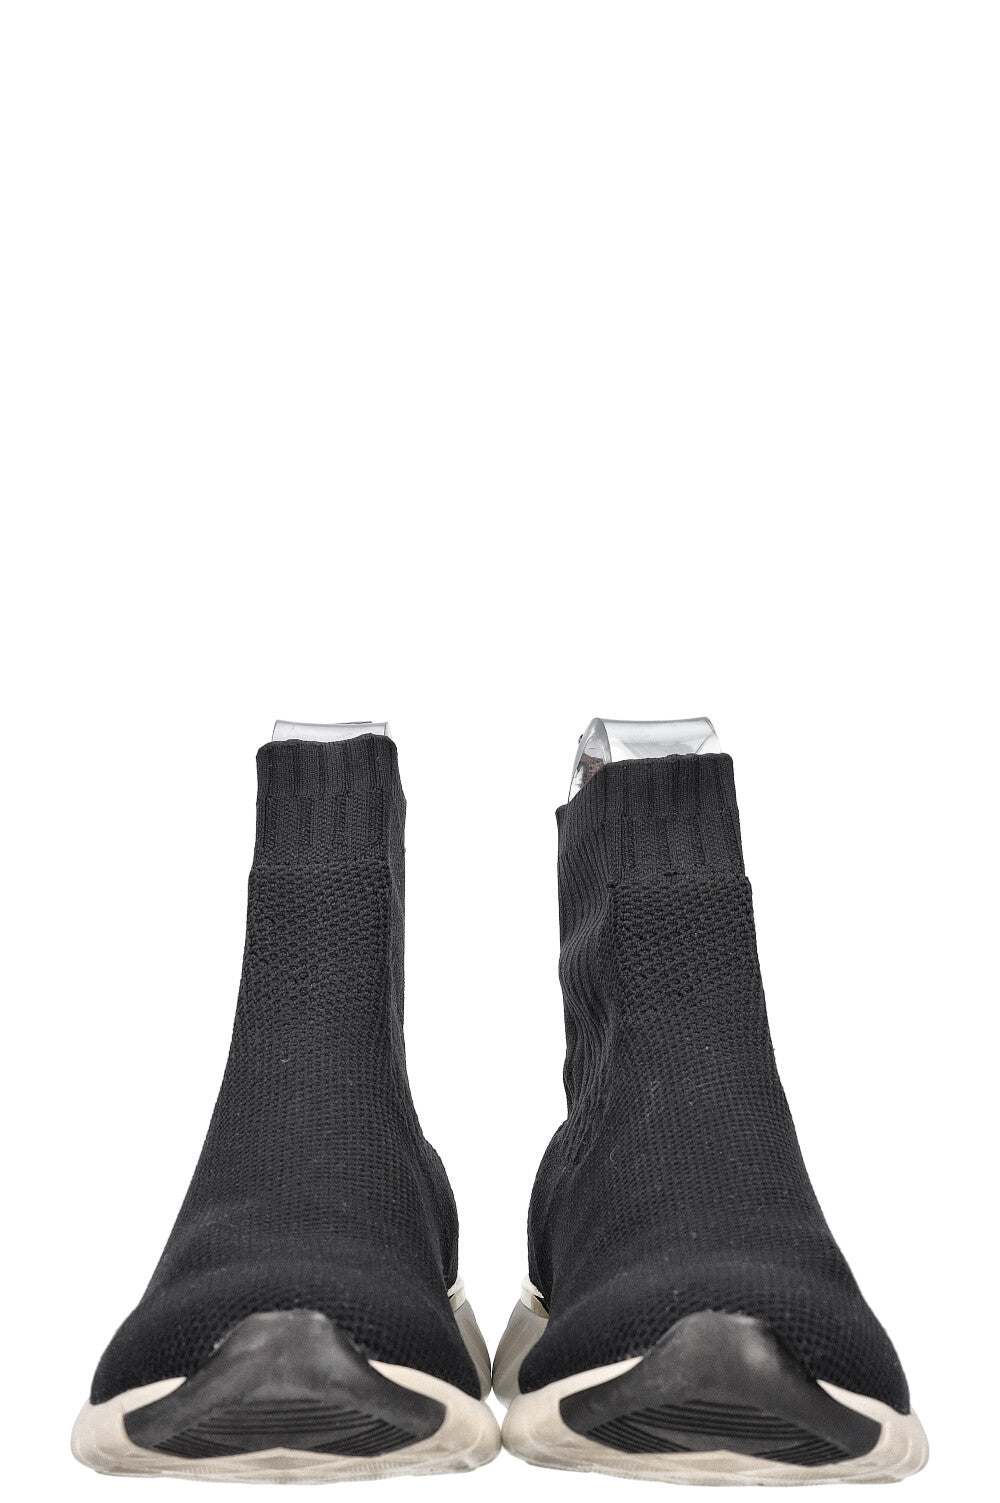 LOUIS VUITTON Aftergame Sock Sneakers Black